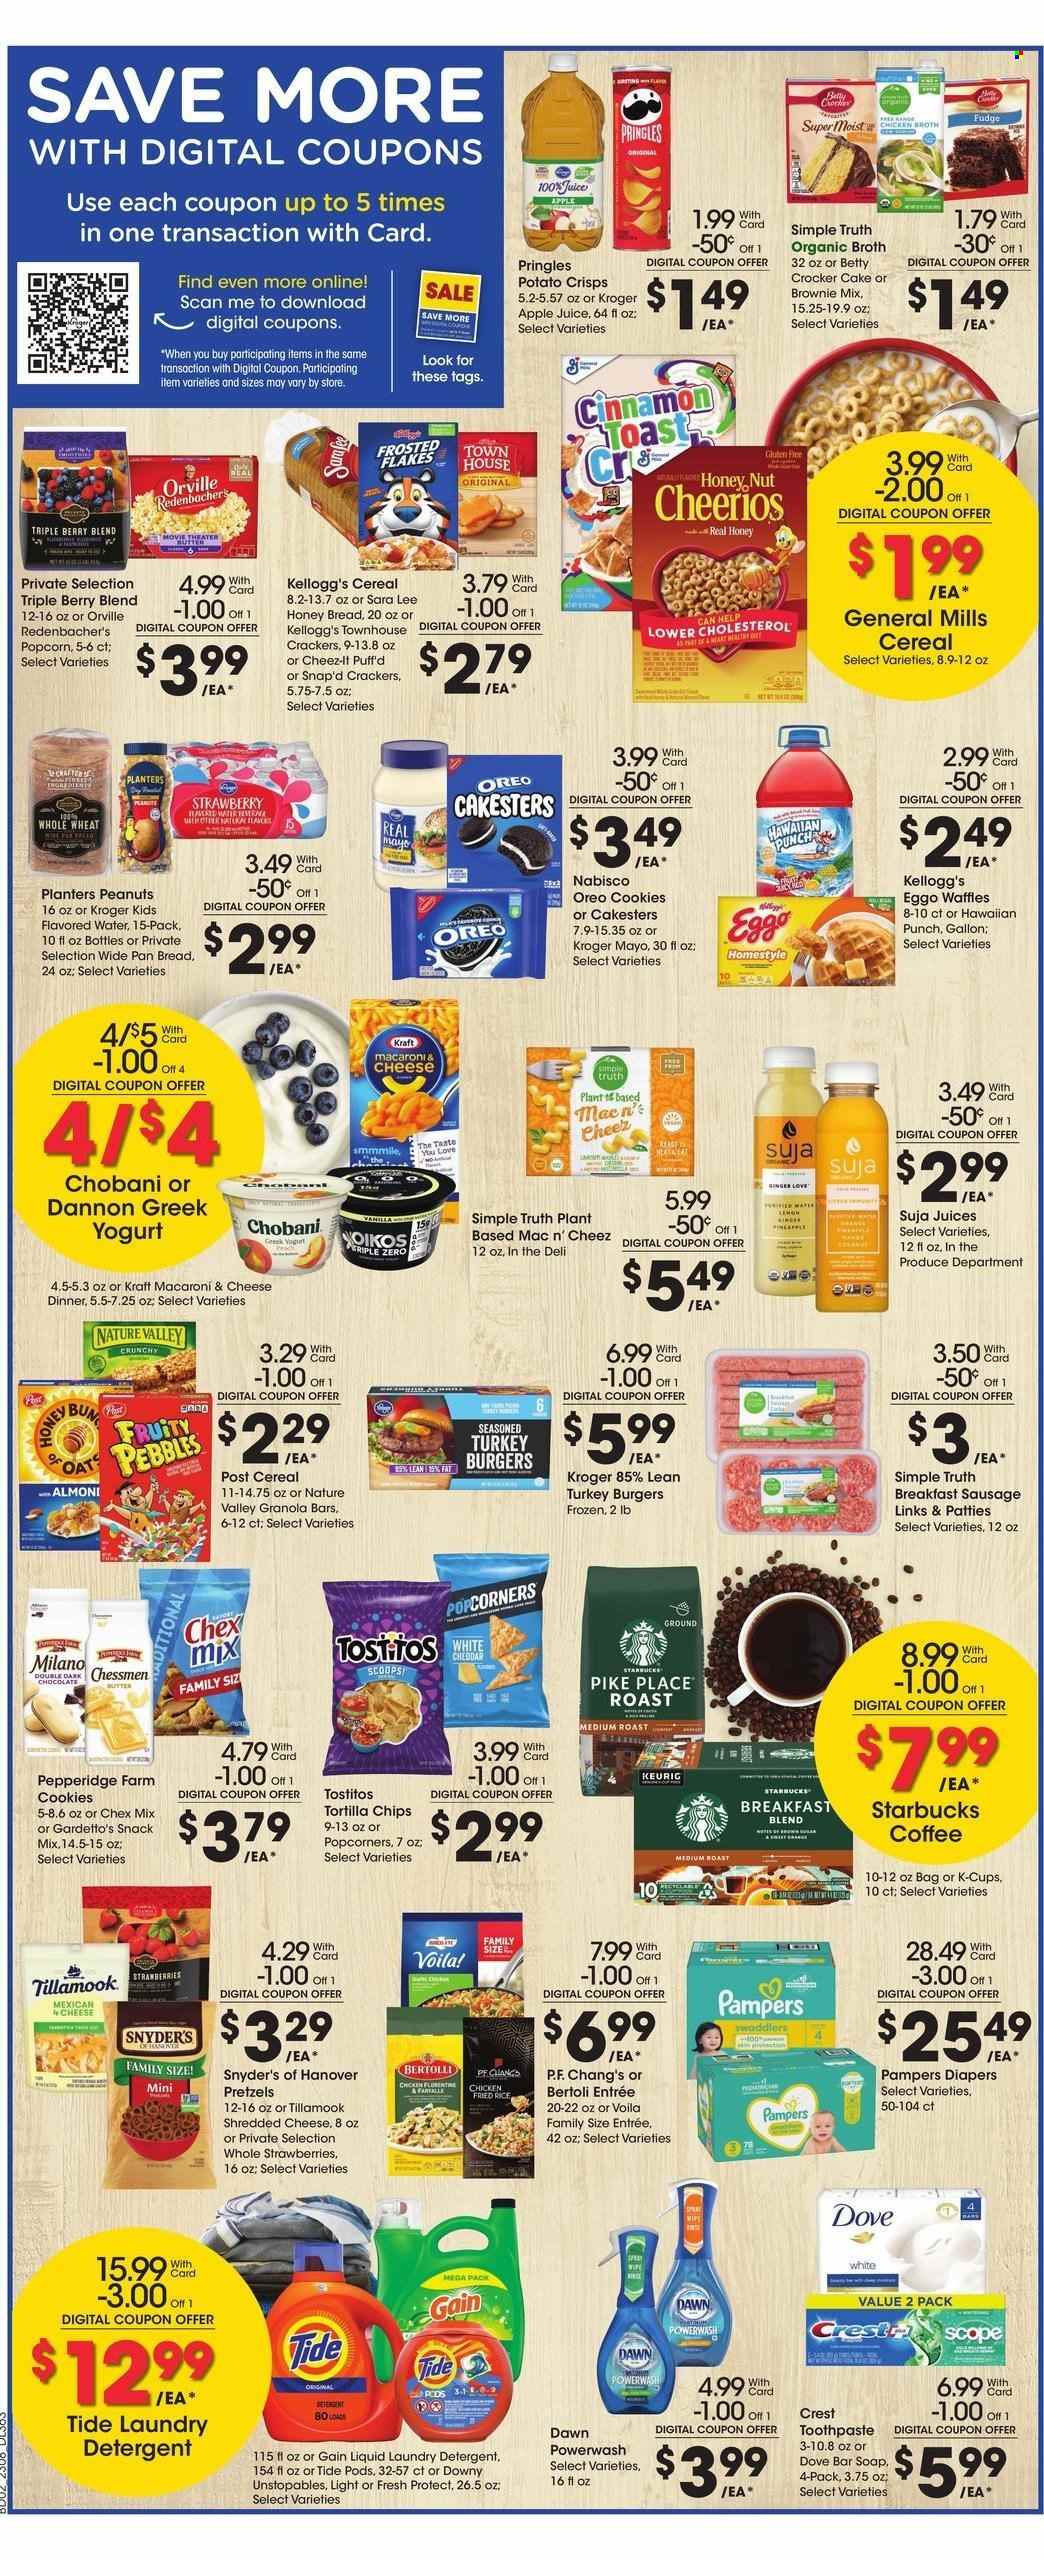 thumbnail - Kroger Flyer - 03/22/2023 - 03/28/2023 - Sales products - pretzels, cake, Sara Lee, waffles, brownie mix, macaroni & cheese, hamburger, Kraft®, Bertolli, roast, sausage, shredded cheese, greek yoghurt, Oreo, yoghurt, Chobani, Dannon, cookies, Dove, fudge, snack, crackers, Kellogg's, tortilla chips, potato crisps, Pringles, popcorn, Cheez-It, Tostitos, Chex Mix, oats, broth, cereals, Cheerios, granola bar, Nature Valley, cinnamon, peanuts, Planters, apple juice, juice, flavored water, water, coffee, Starbucks, coffee capsules, K-Cups, Keurig, breakfast blend, chicken, turkey burger, Pampers, nappies, detergent, Gain, Tide, Unstopables, laundry detergent, soap bar, soap, toothpaste, Crest, pot, pan, hob. Page 5.